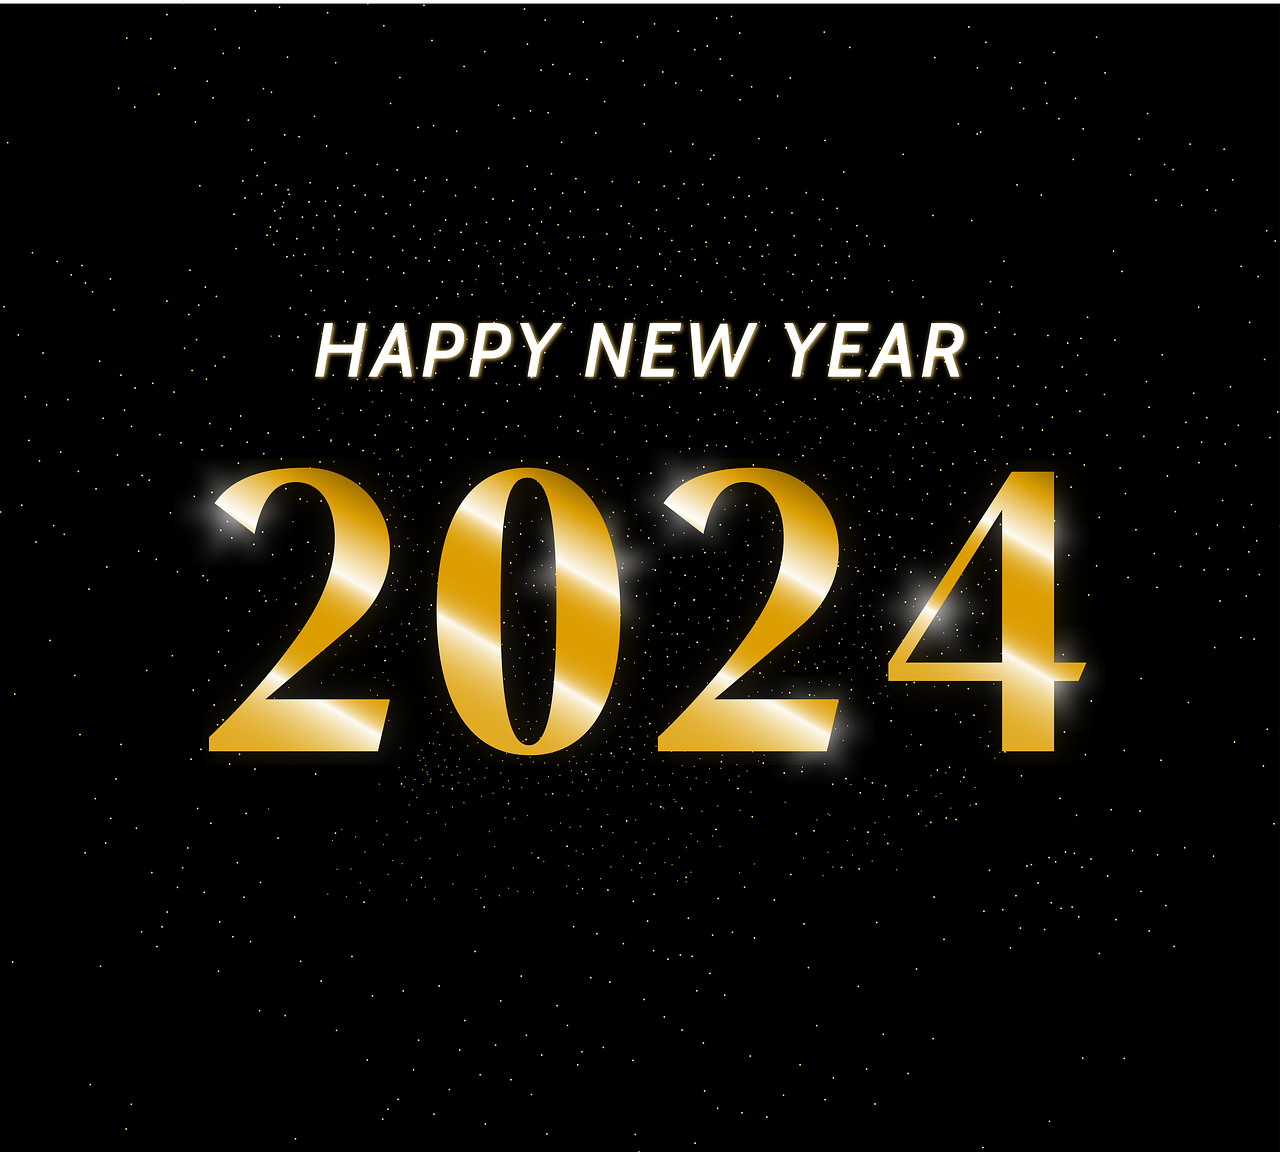 Happy New Year 2024 Wishes photos trend of January